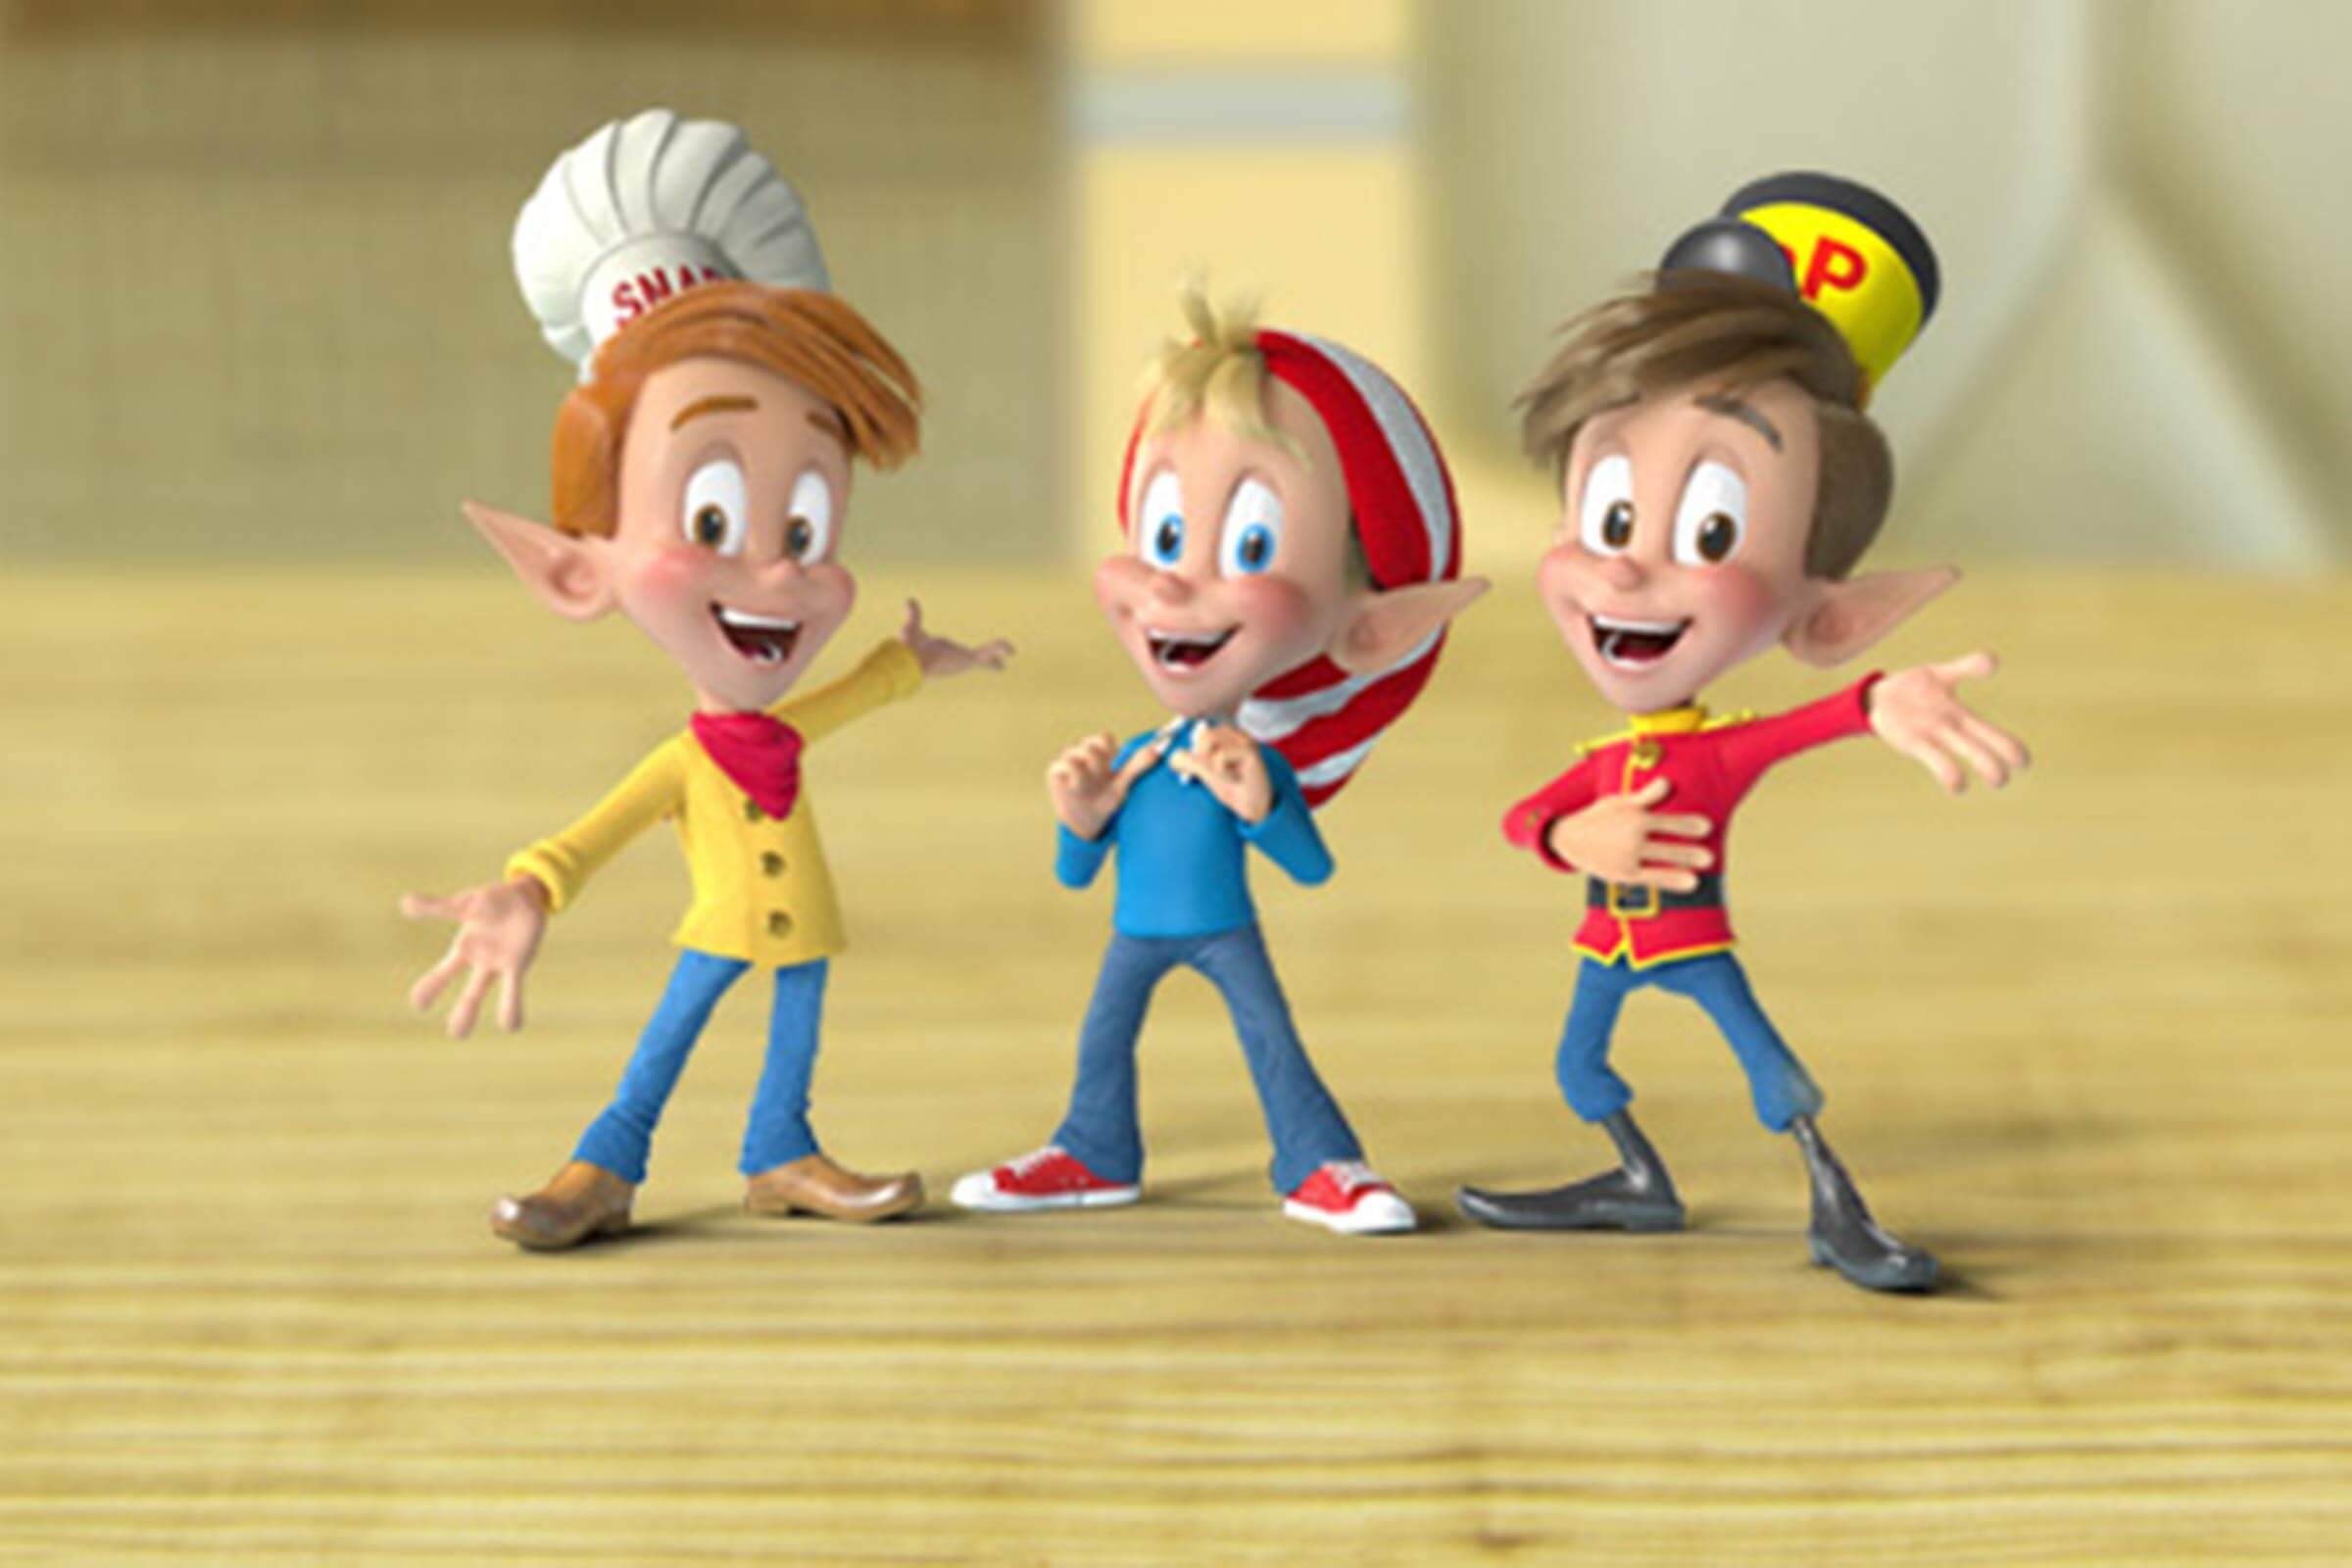 snap, crackle pop controversy